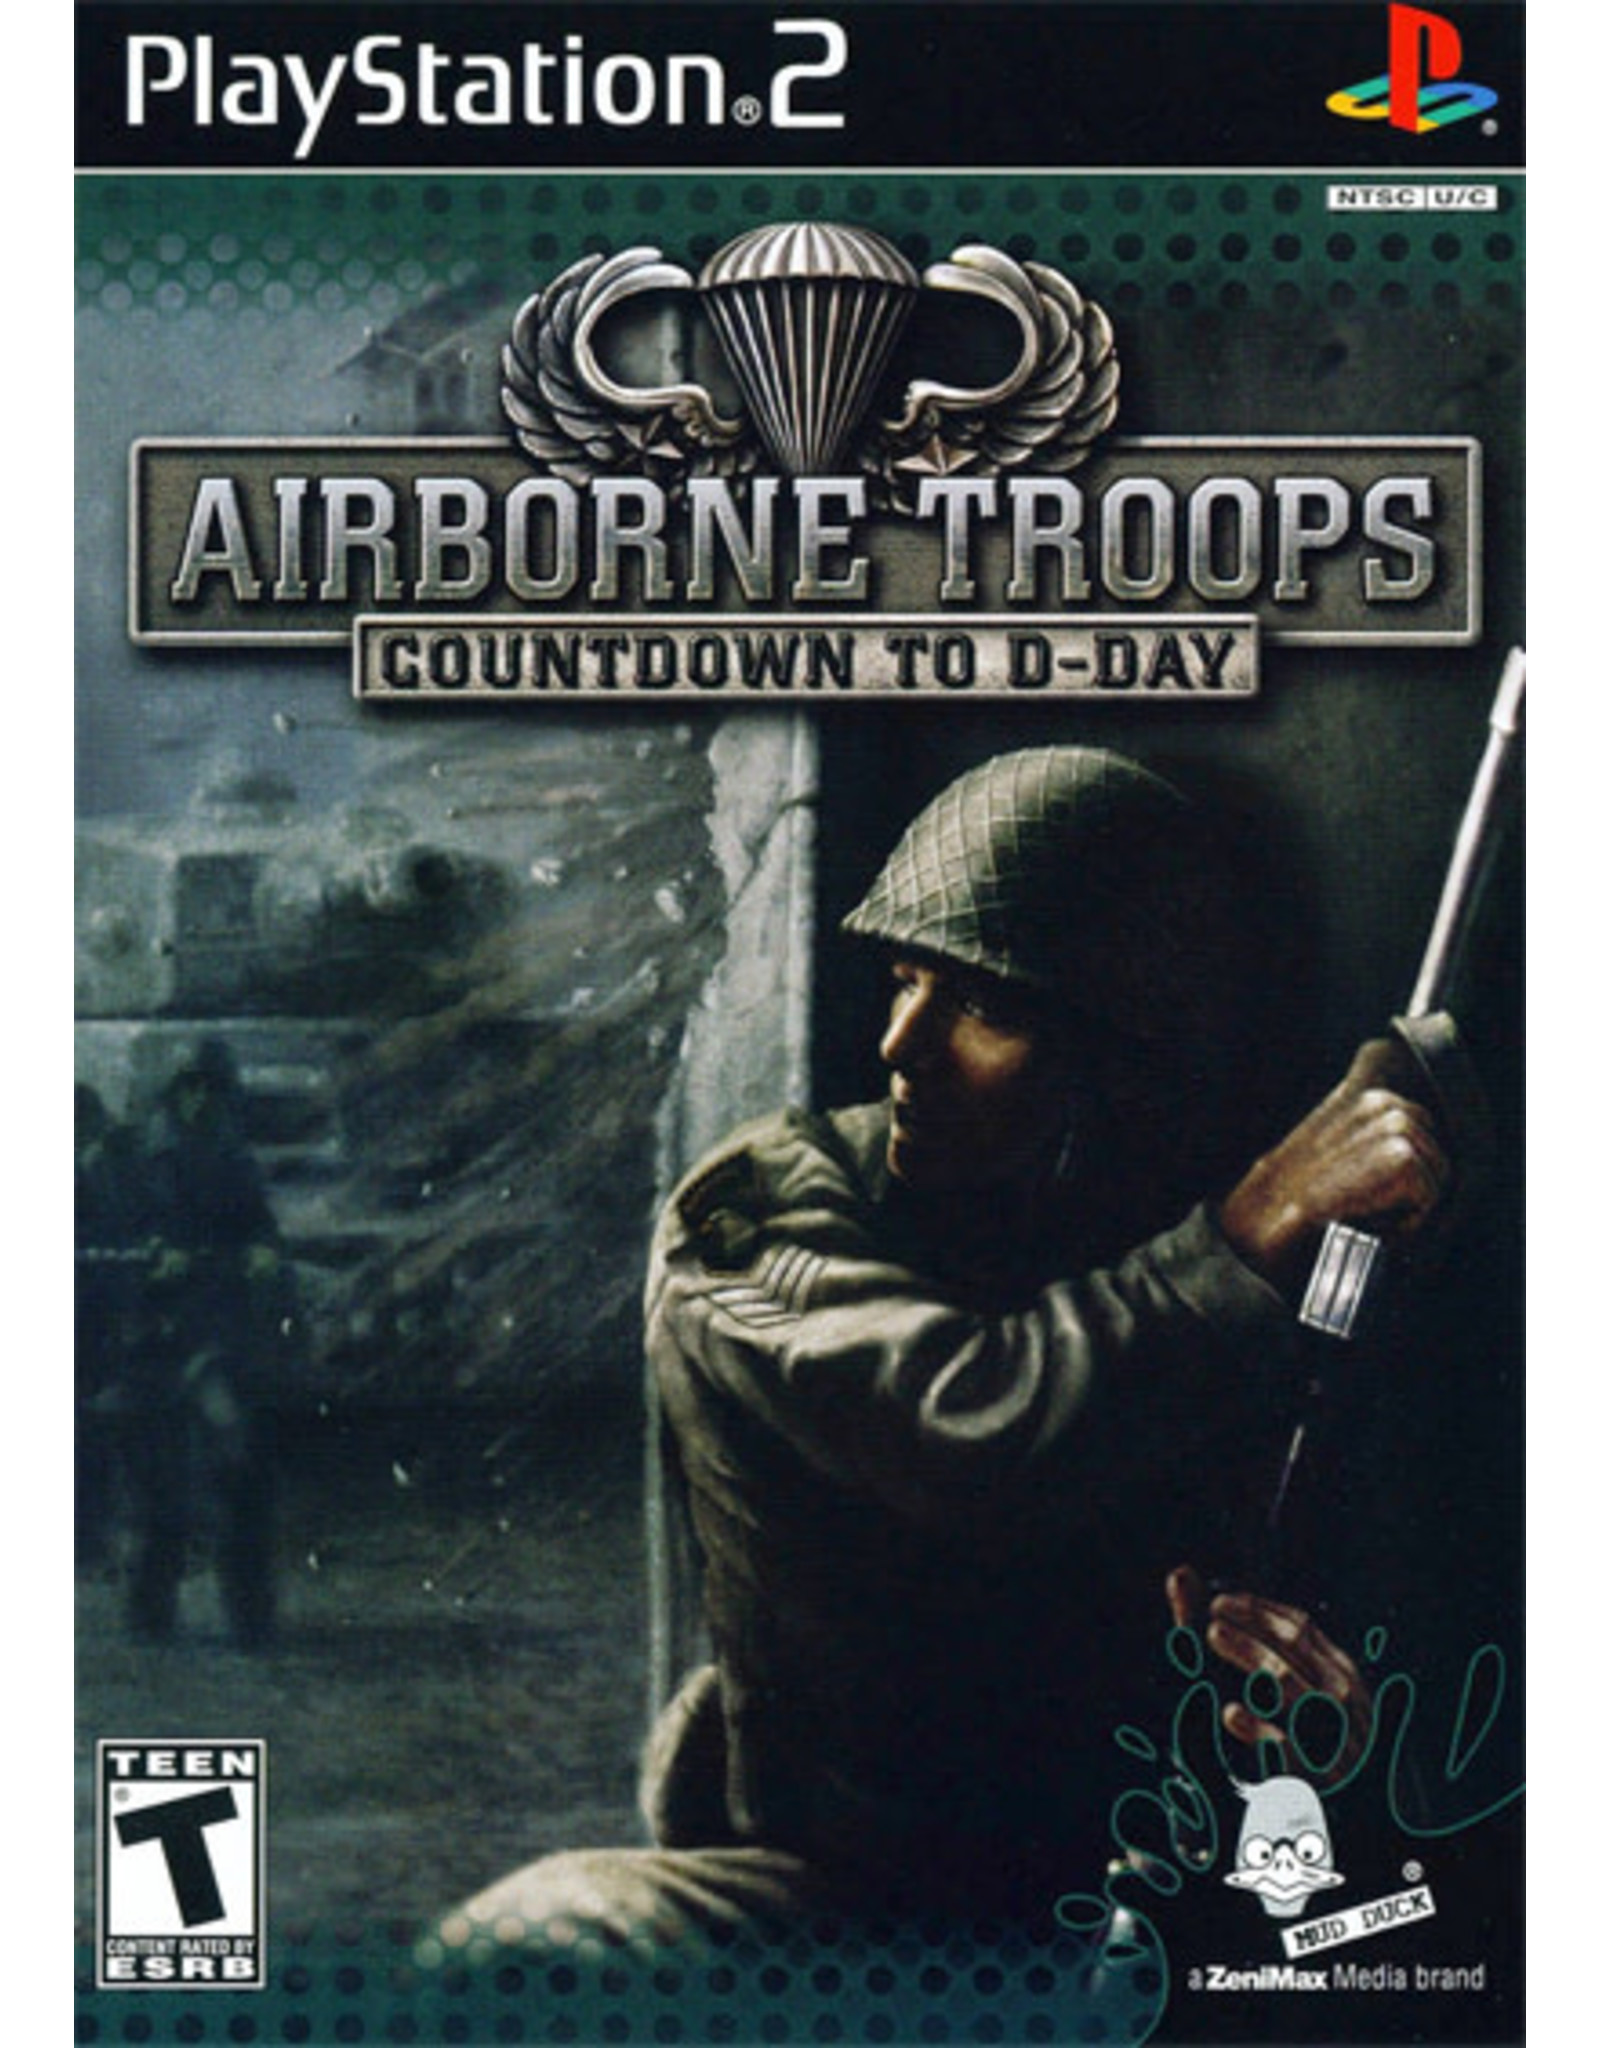 Playstation 2 Airborne Troops Countdown to D-Day (No Manual)